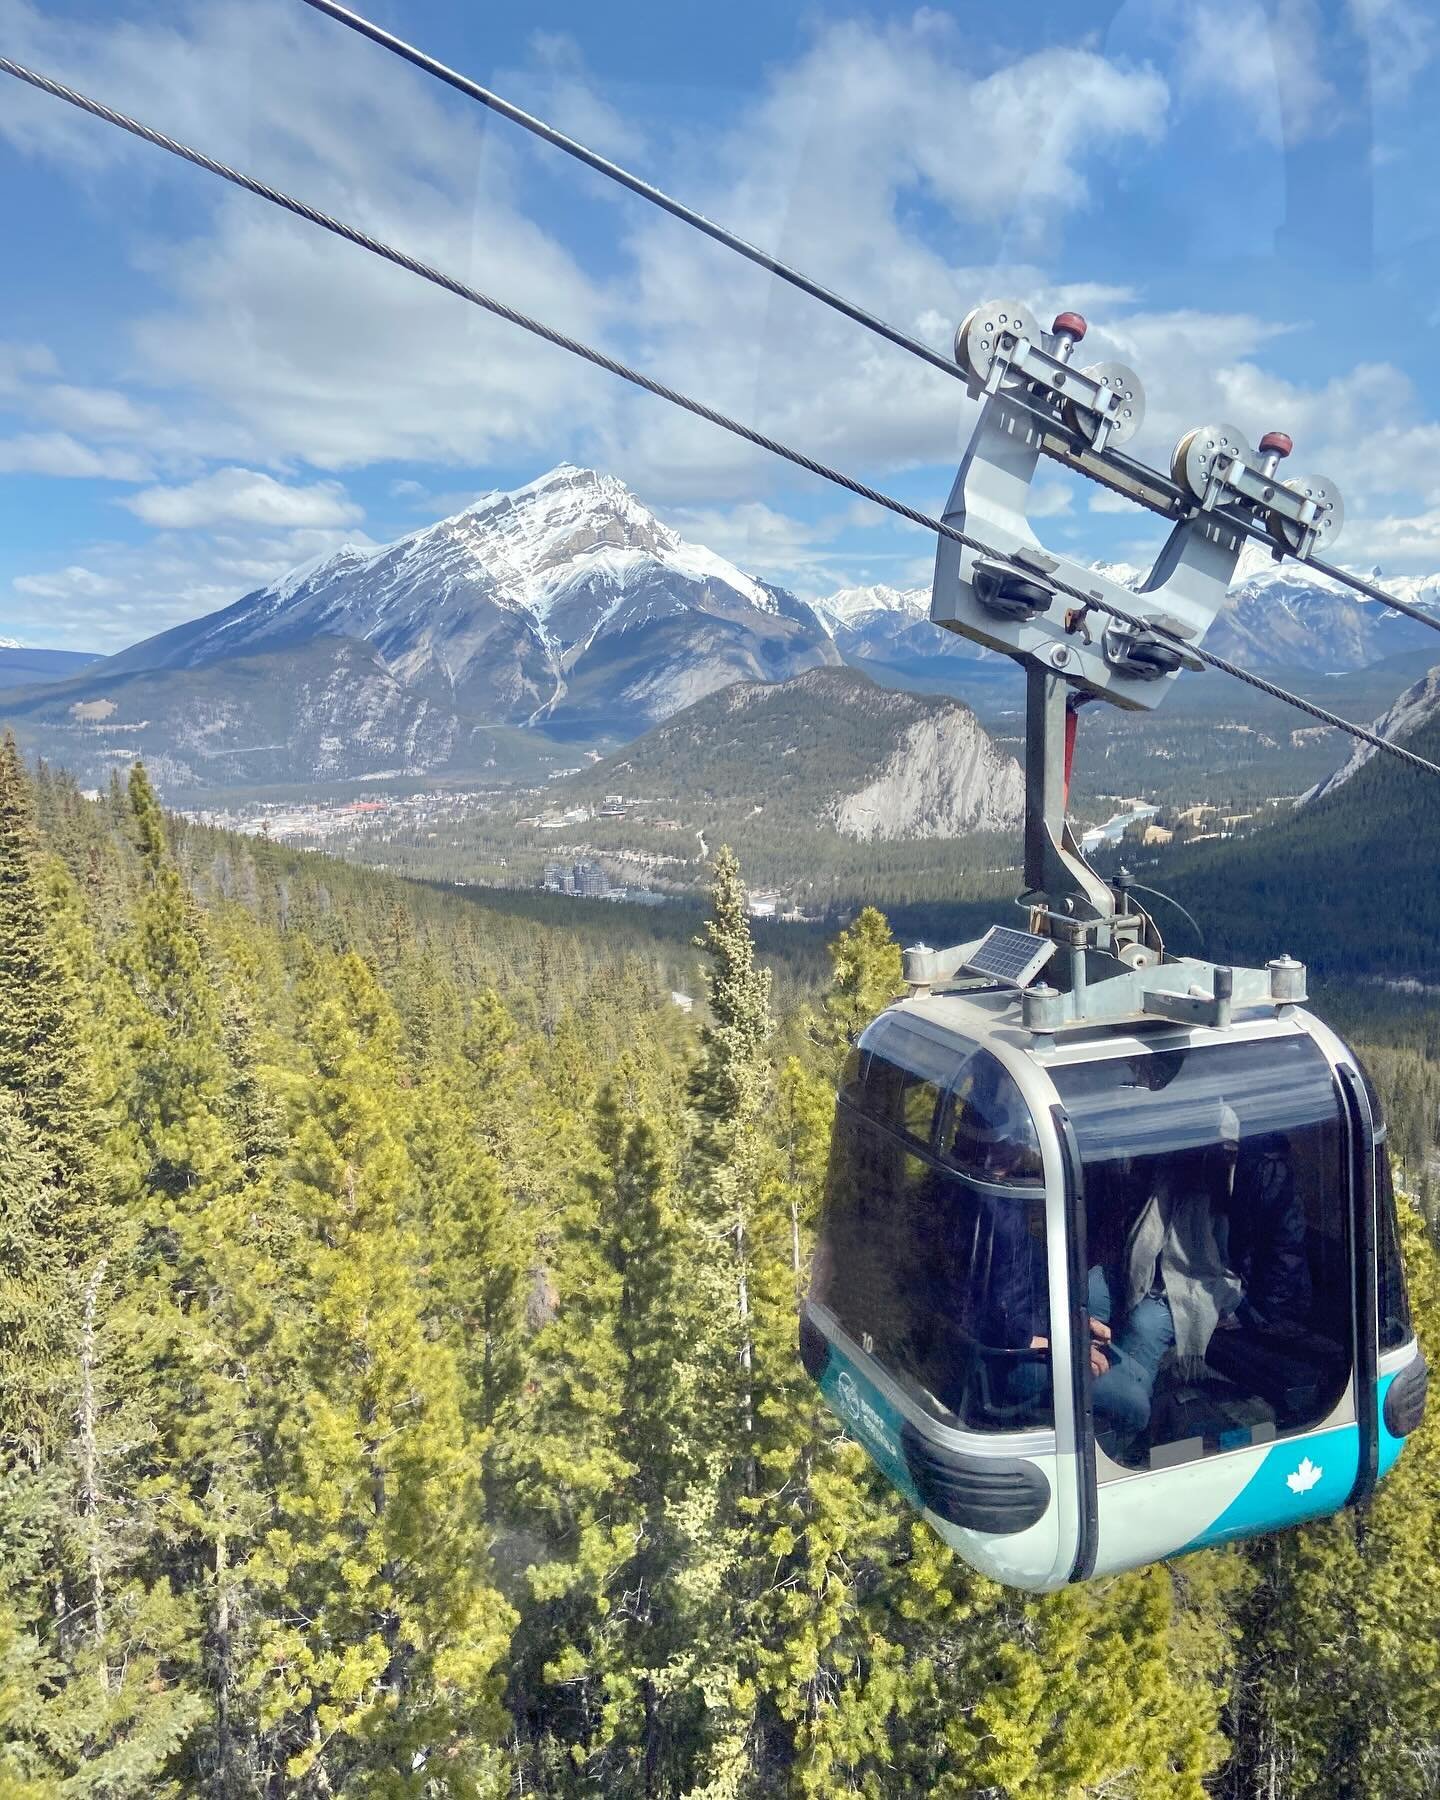 Soar 698 metres (2,292 feet) on an 8-minute journey to the summit of Sulphur Mountain. Glide over the treetops and arrive at a jaw-dropping mountaintop experience.

Follow in the footsteps of Norman Sanson, who walked to the top of Sulphur Mountain w